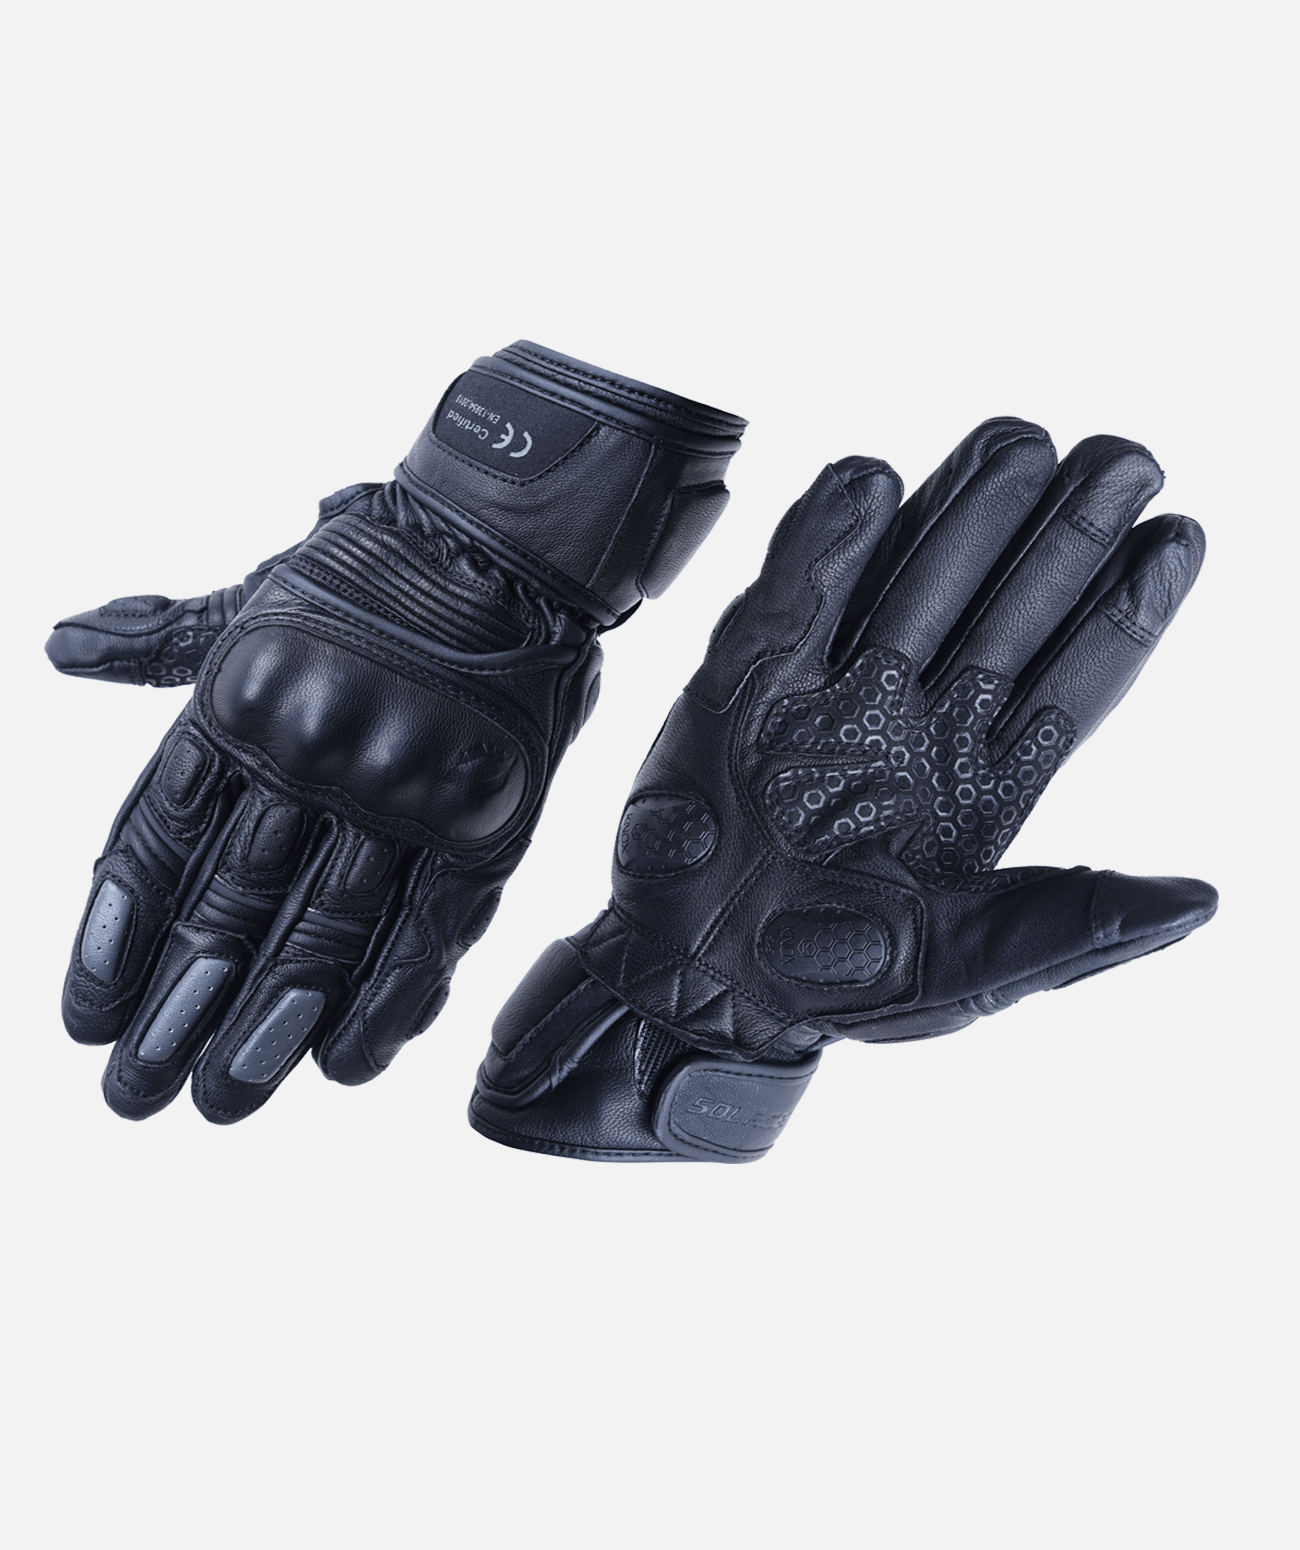 SOLACE Riding Gloves Ramble Black, CE Approved